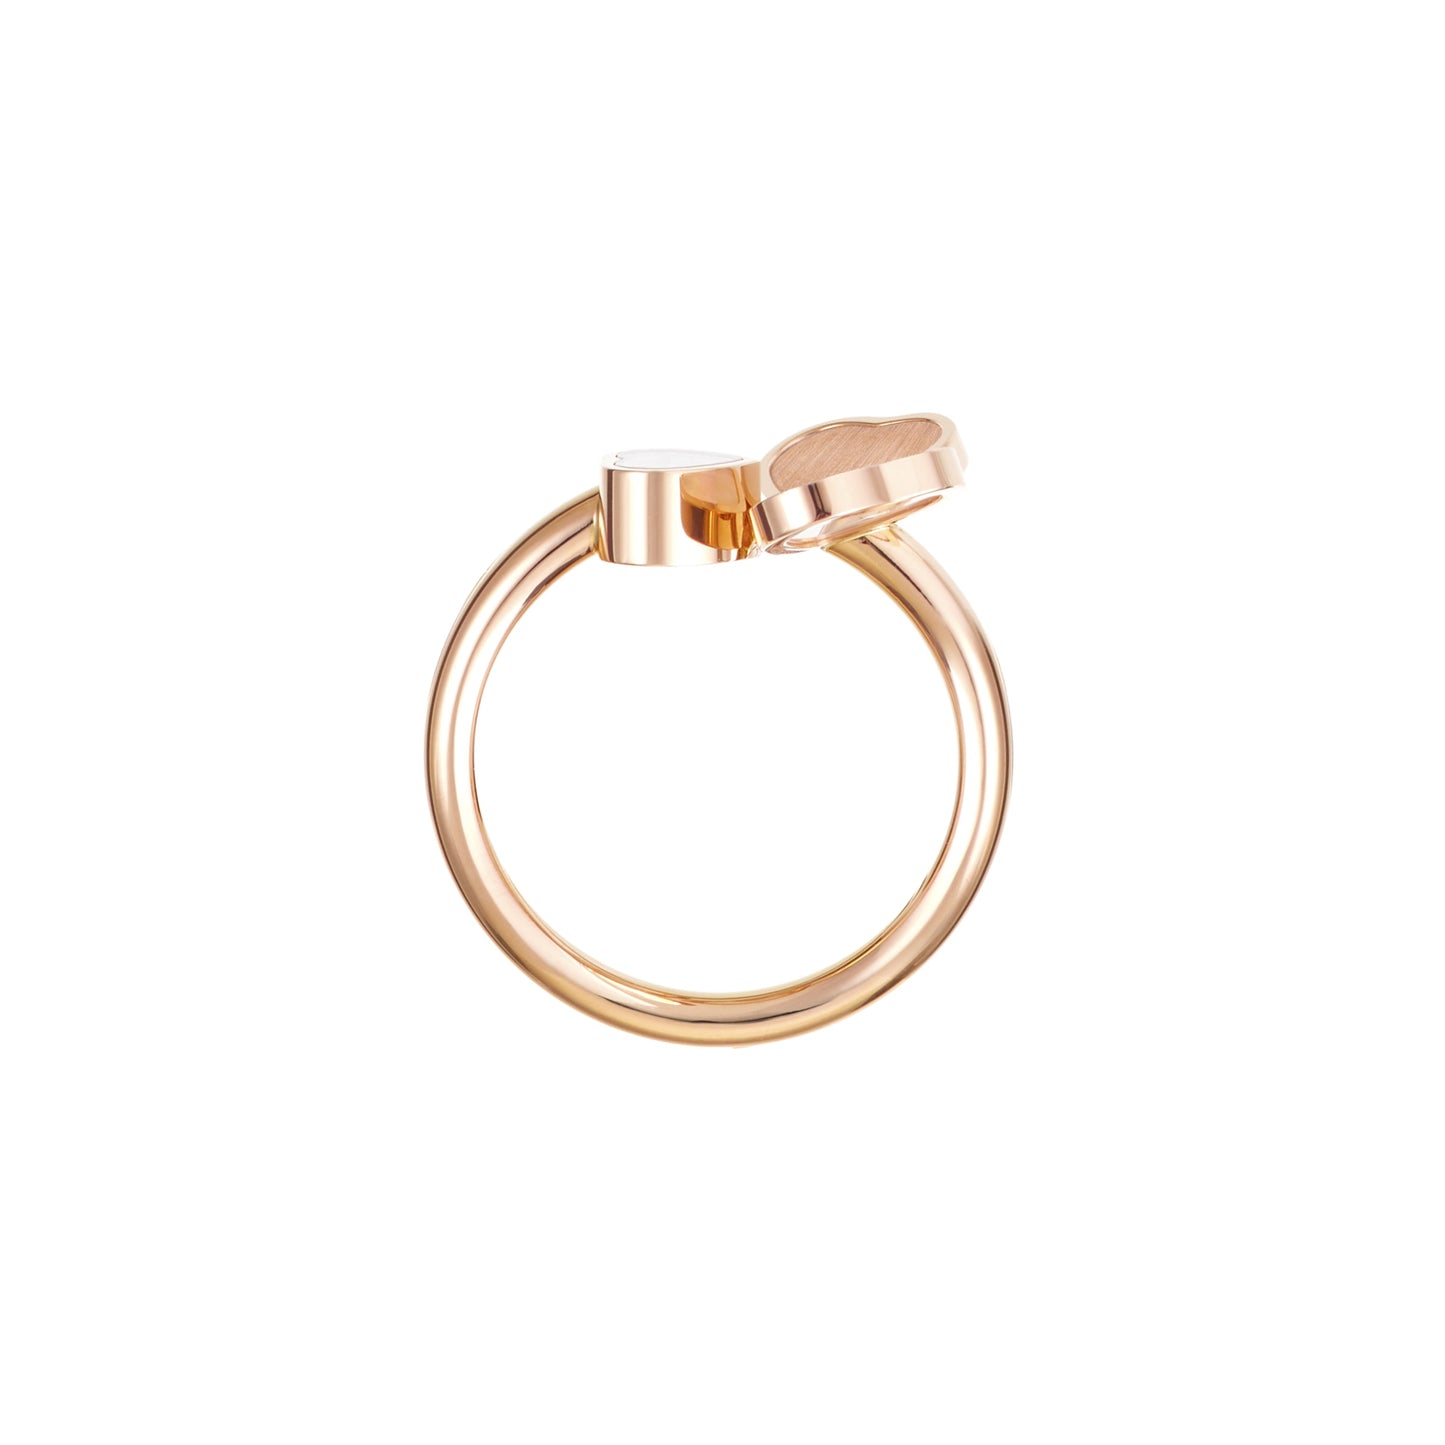 HAPPY HEARTS WINGS RING, ETHICAL ROSE GOLD, DIAMOND 82A083-5700